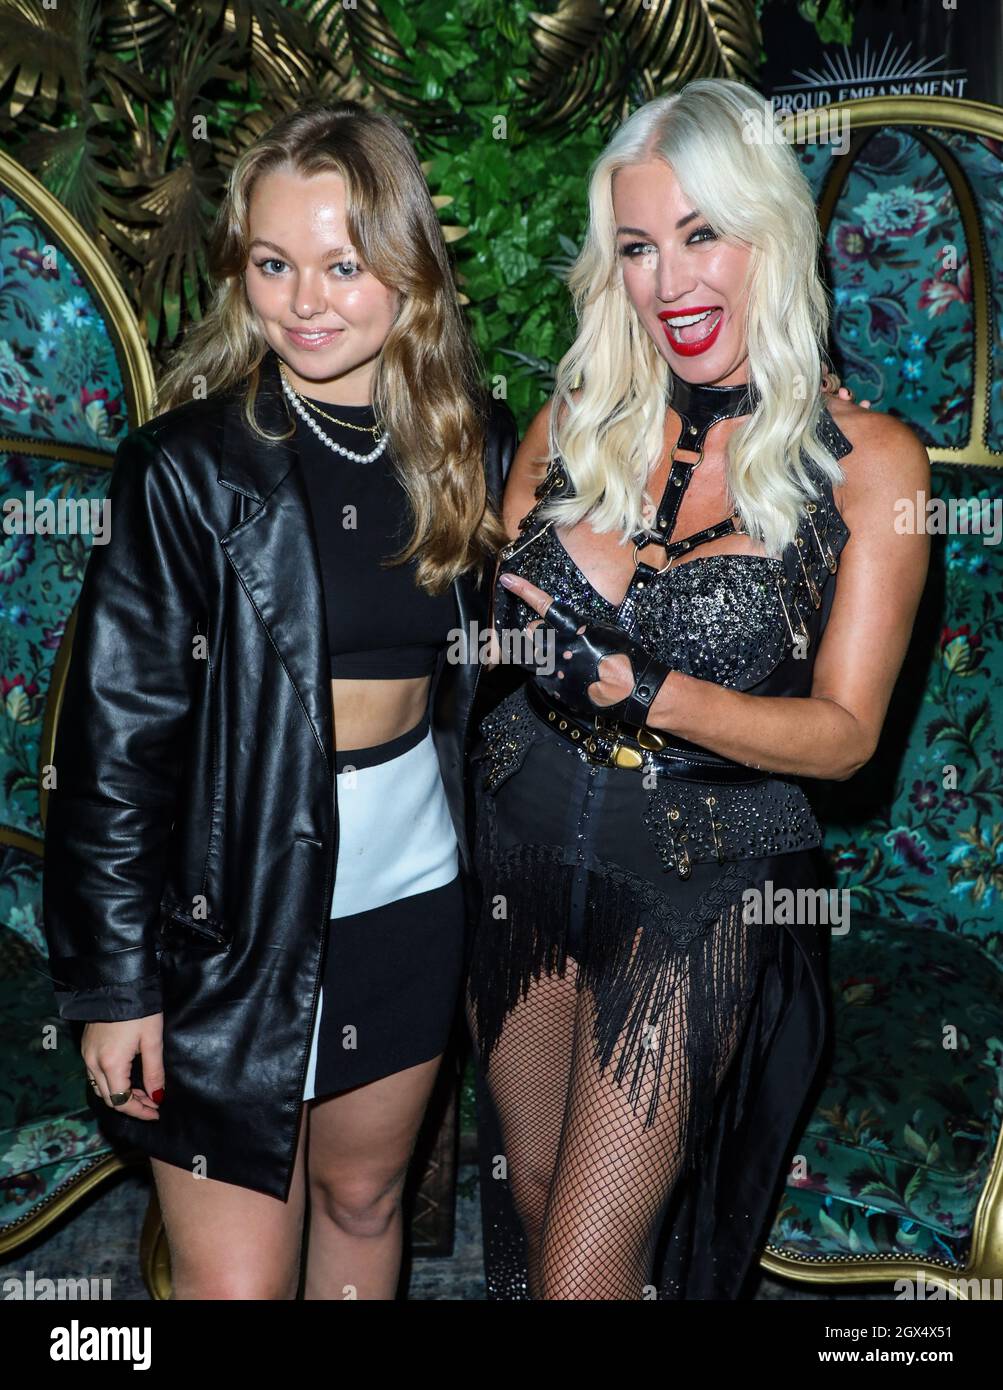 London, UK. 02nd Oct, 2021. Neighbours star, Jemma Donovan reunites with her on screen mother Denise Van Outen after watching her perform in Cabaret All Stars at Proud Embankment in London. Jemma's famous father is Neighbours legend Jason Donovan. Credit: SOPA Images Limited/Alamy Live News Stock Photo